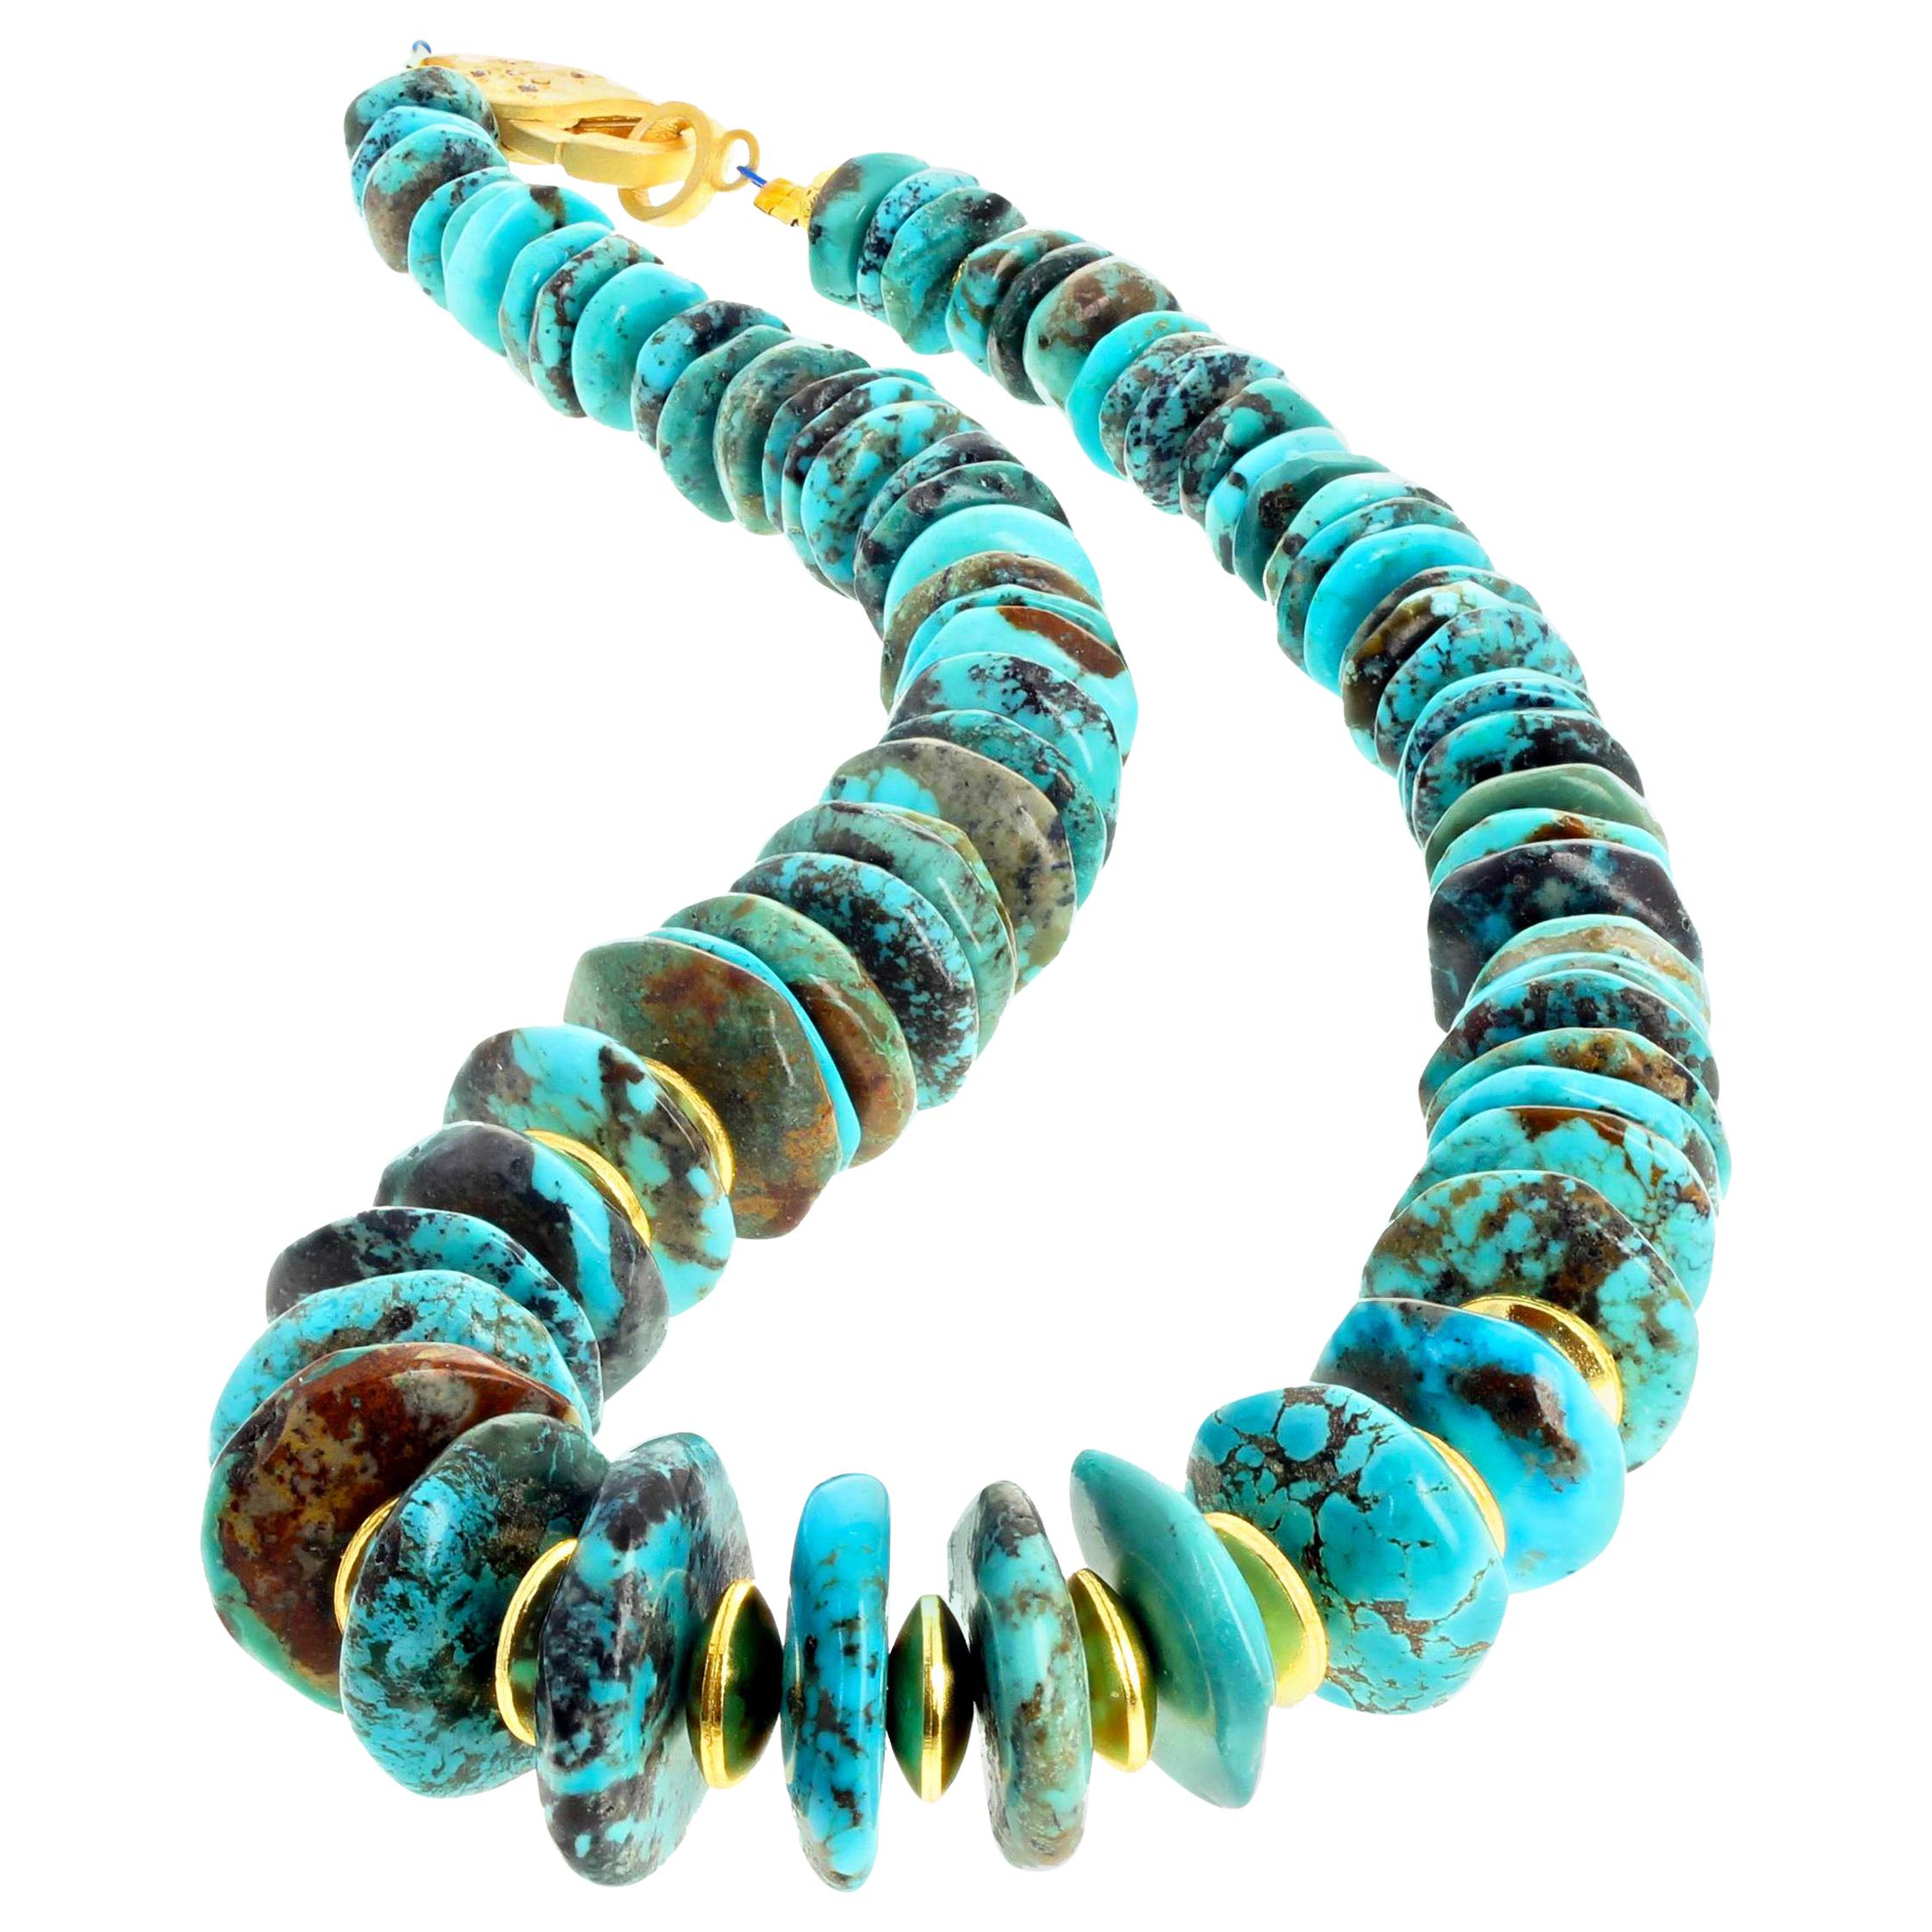 Famous Iron Mountain Turquoise and Goldy Rondels Necklace